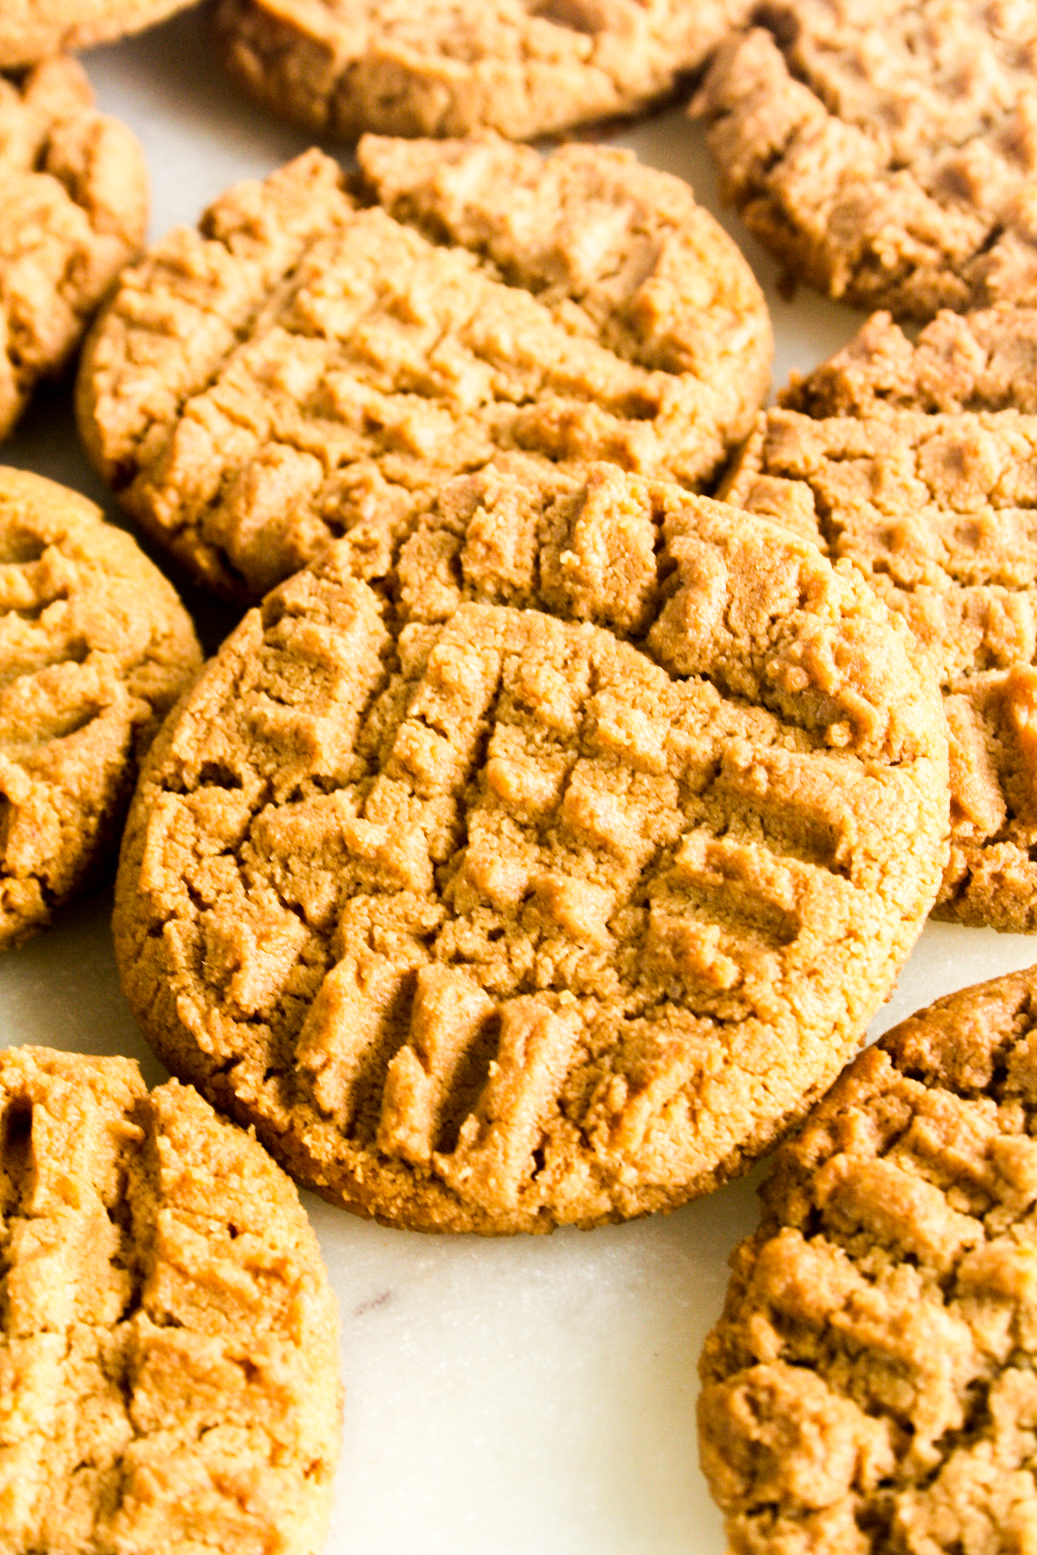 Super quick, chewy and crunchy flourless peanut butter cookies